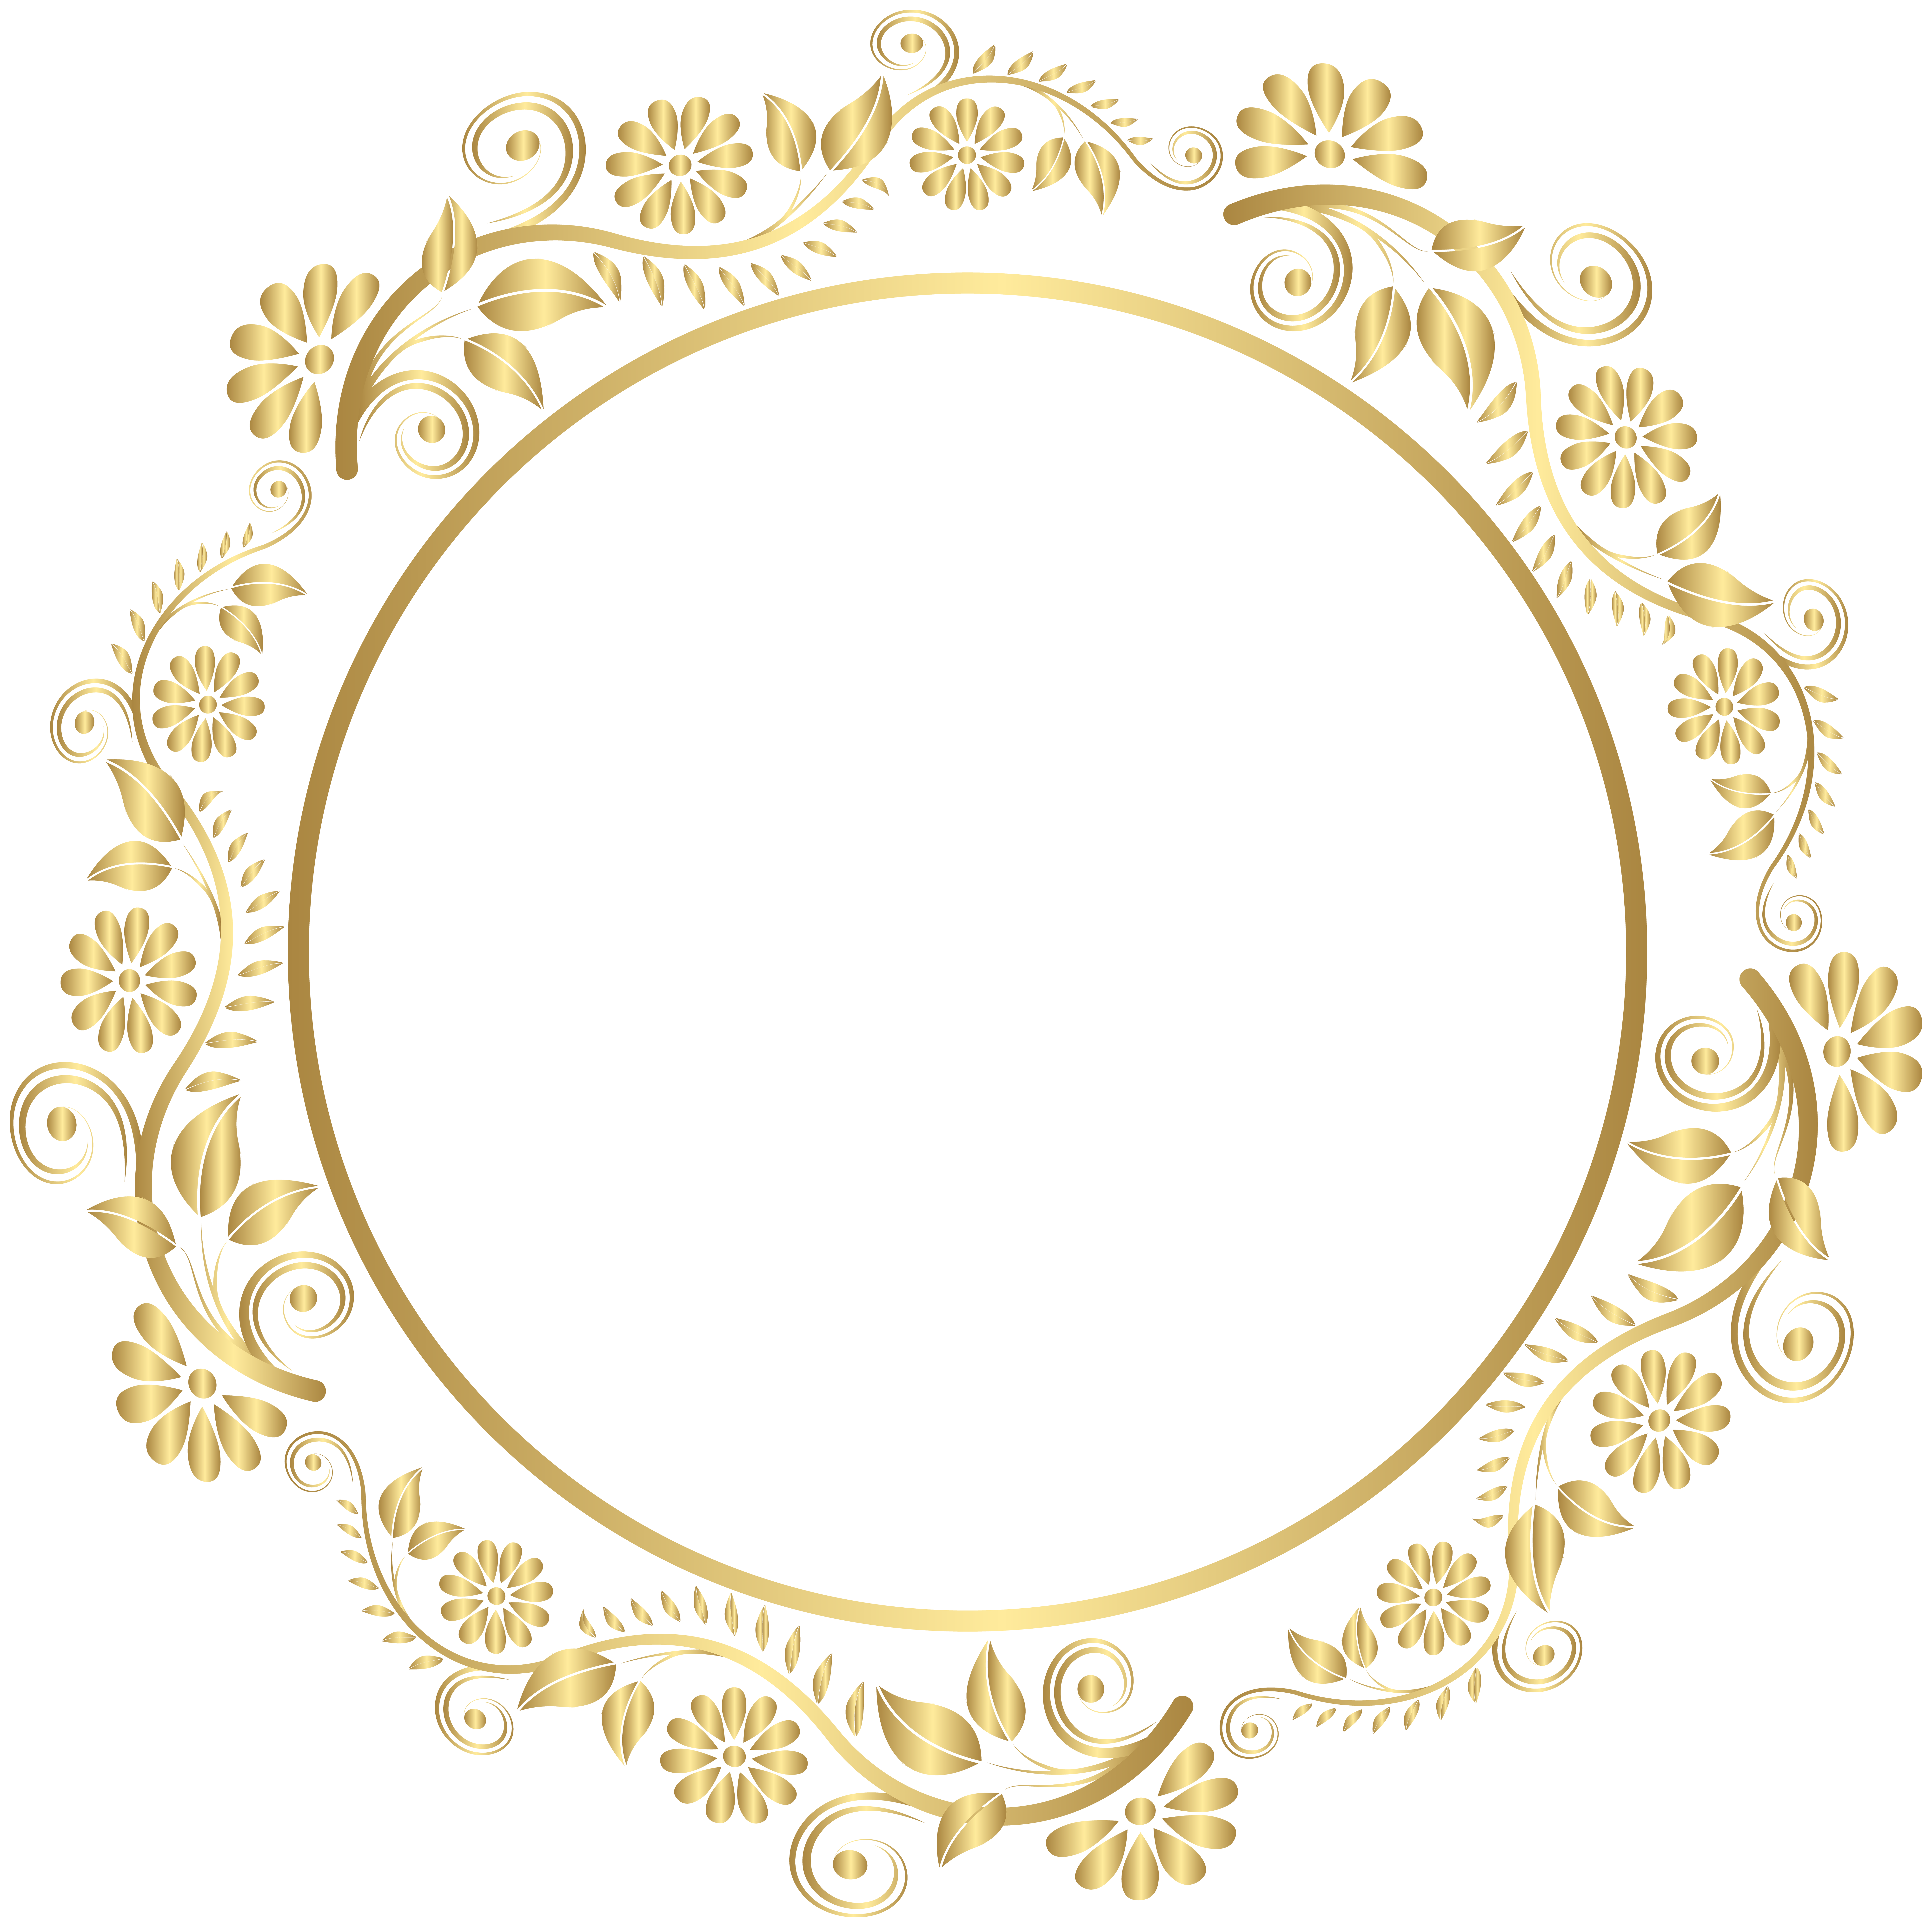 Frame Deco Border Round Gold Free HD Image Clipart